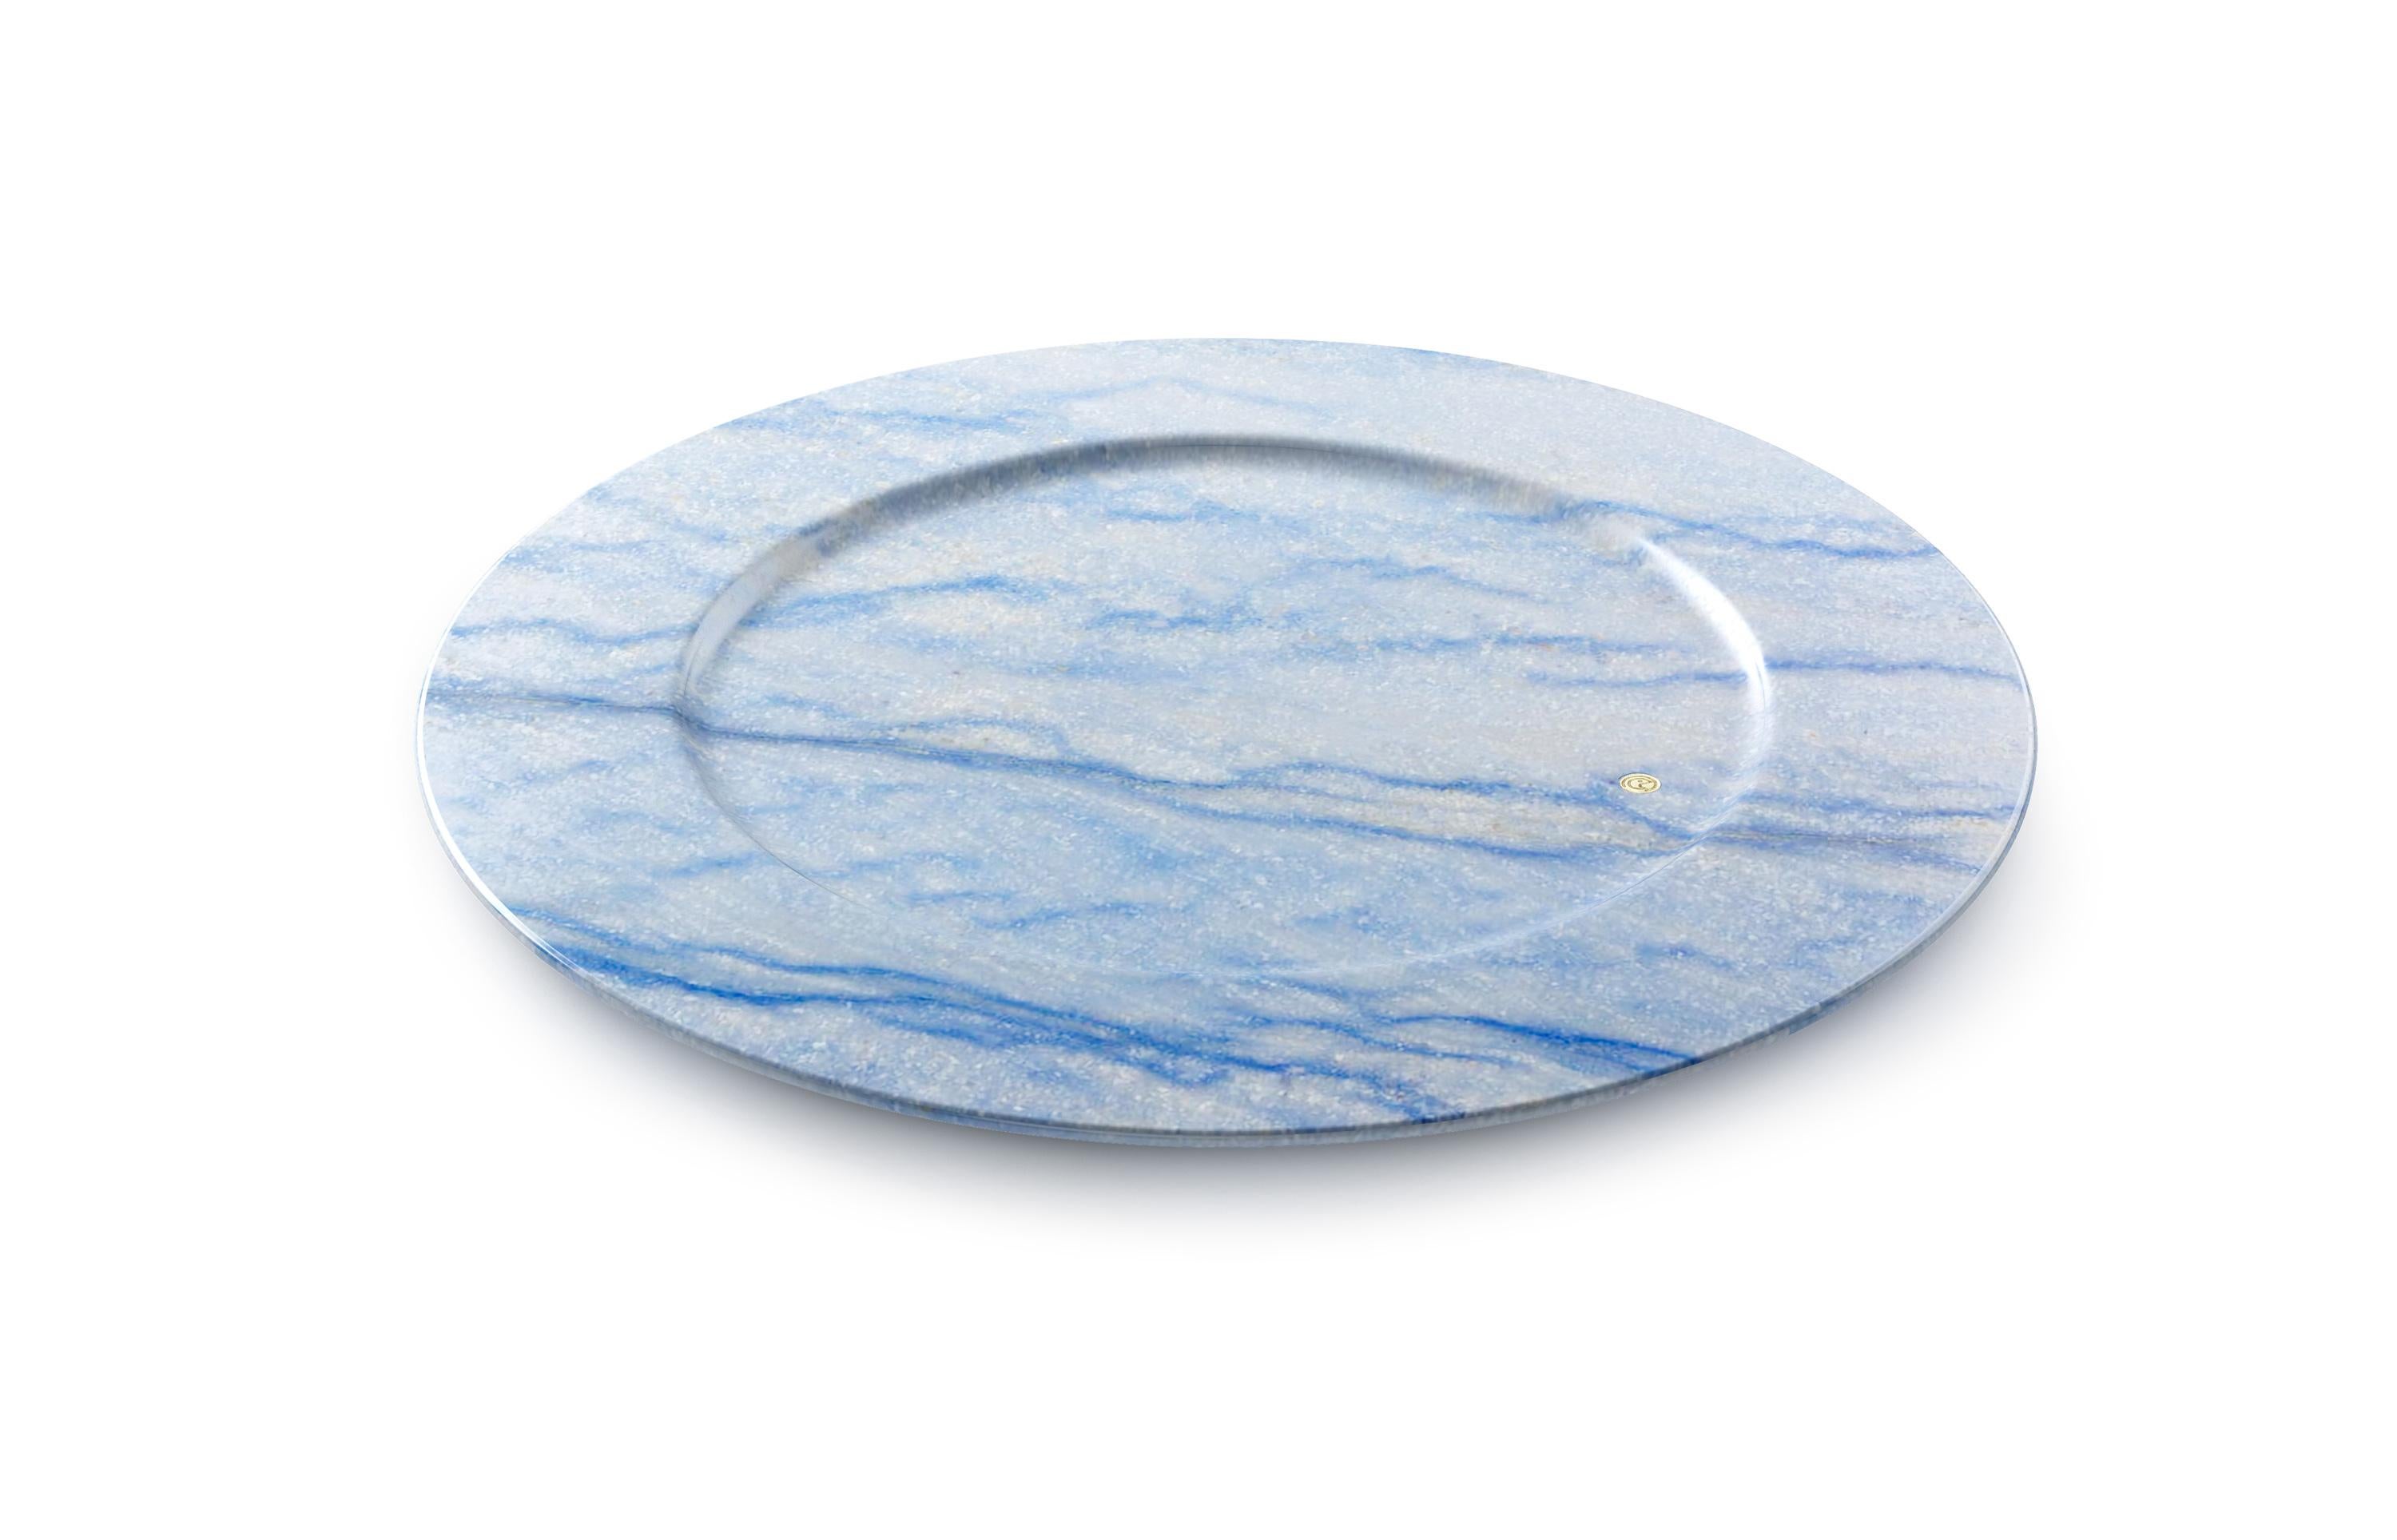 Charger Plate Platters Serveware Blue Azul Macaubas Marble Handmade Design In New Condition For Sale In Ancona, Marche